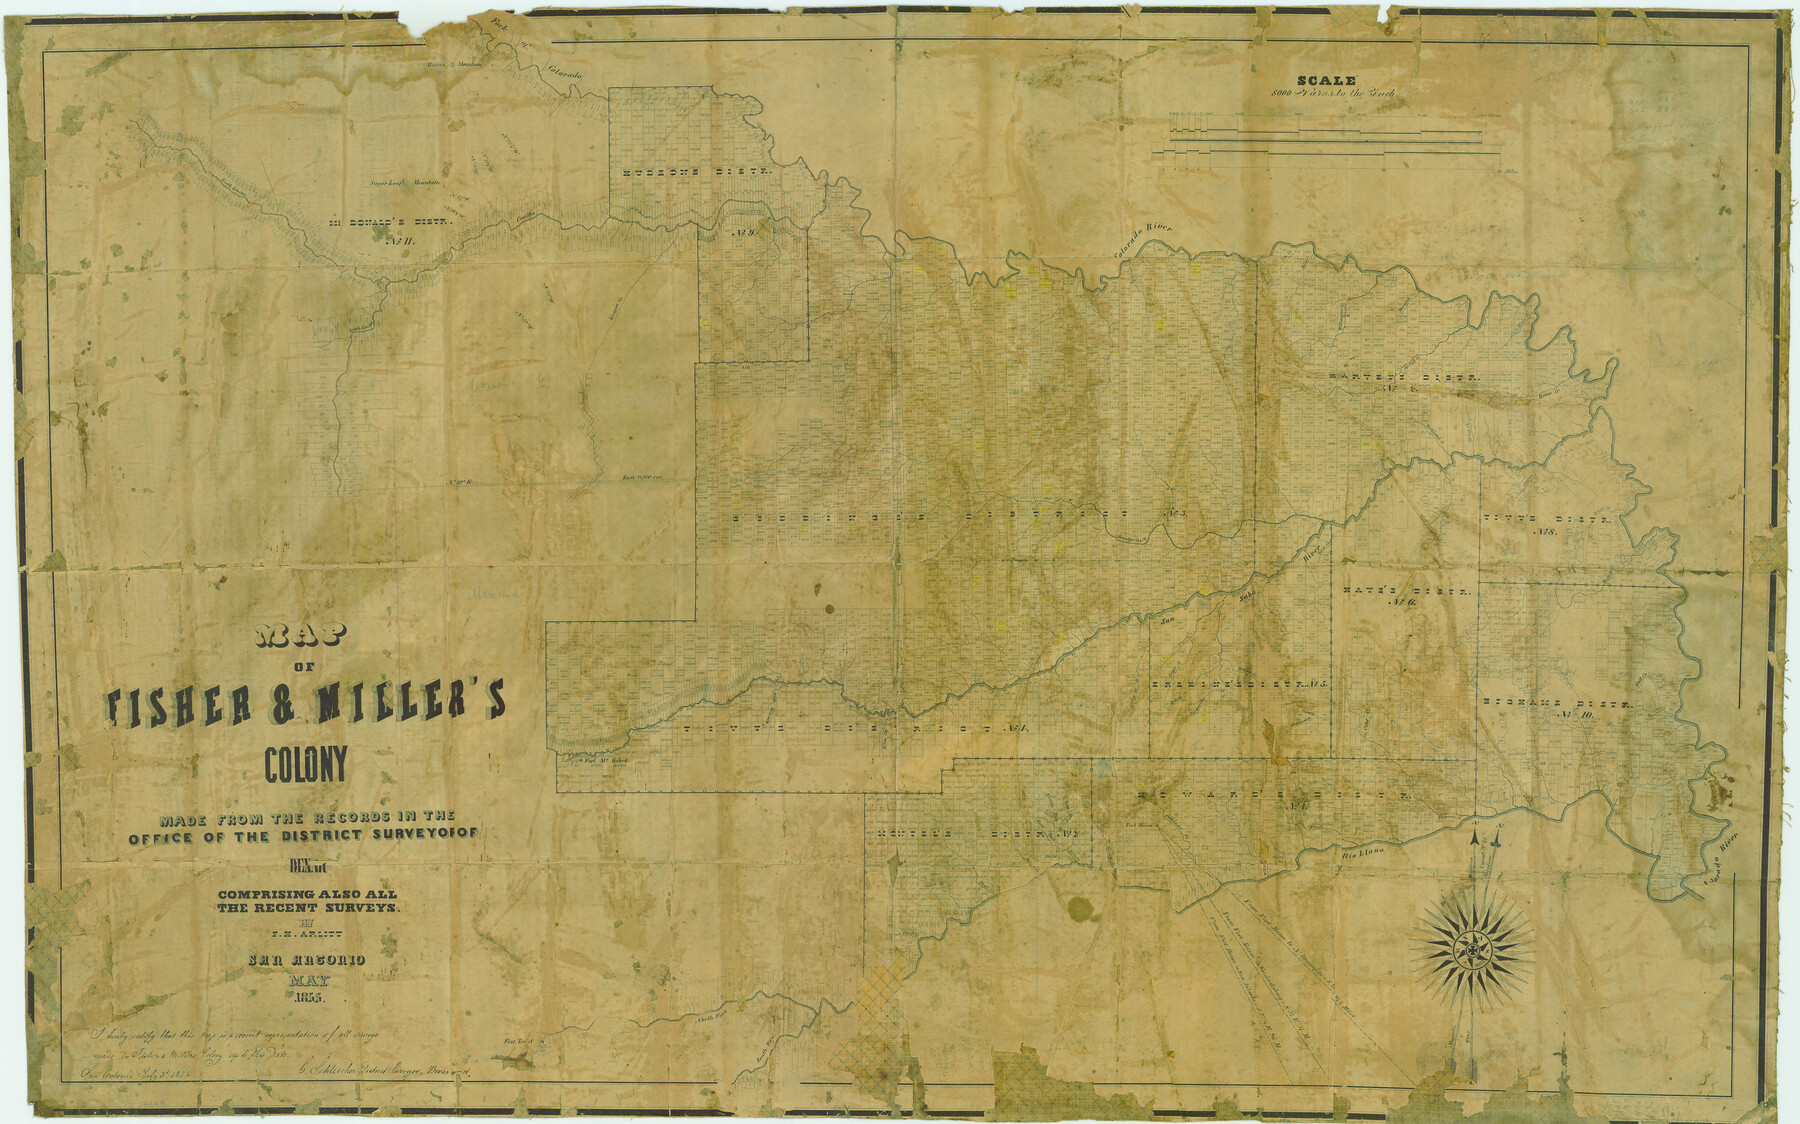 633, Map of Fisher & Miller's Colony made from the records in the office of the District Surveyor of Bexar comprising also all the recent surveys, Maddox Collection